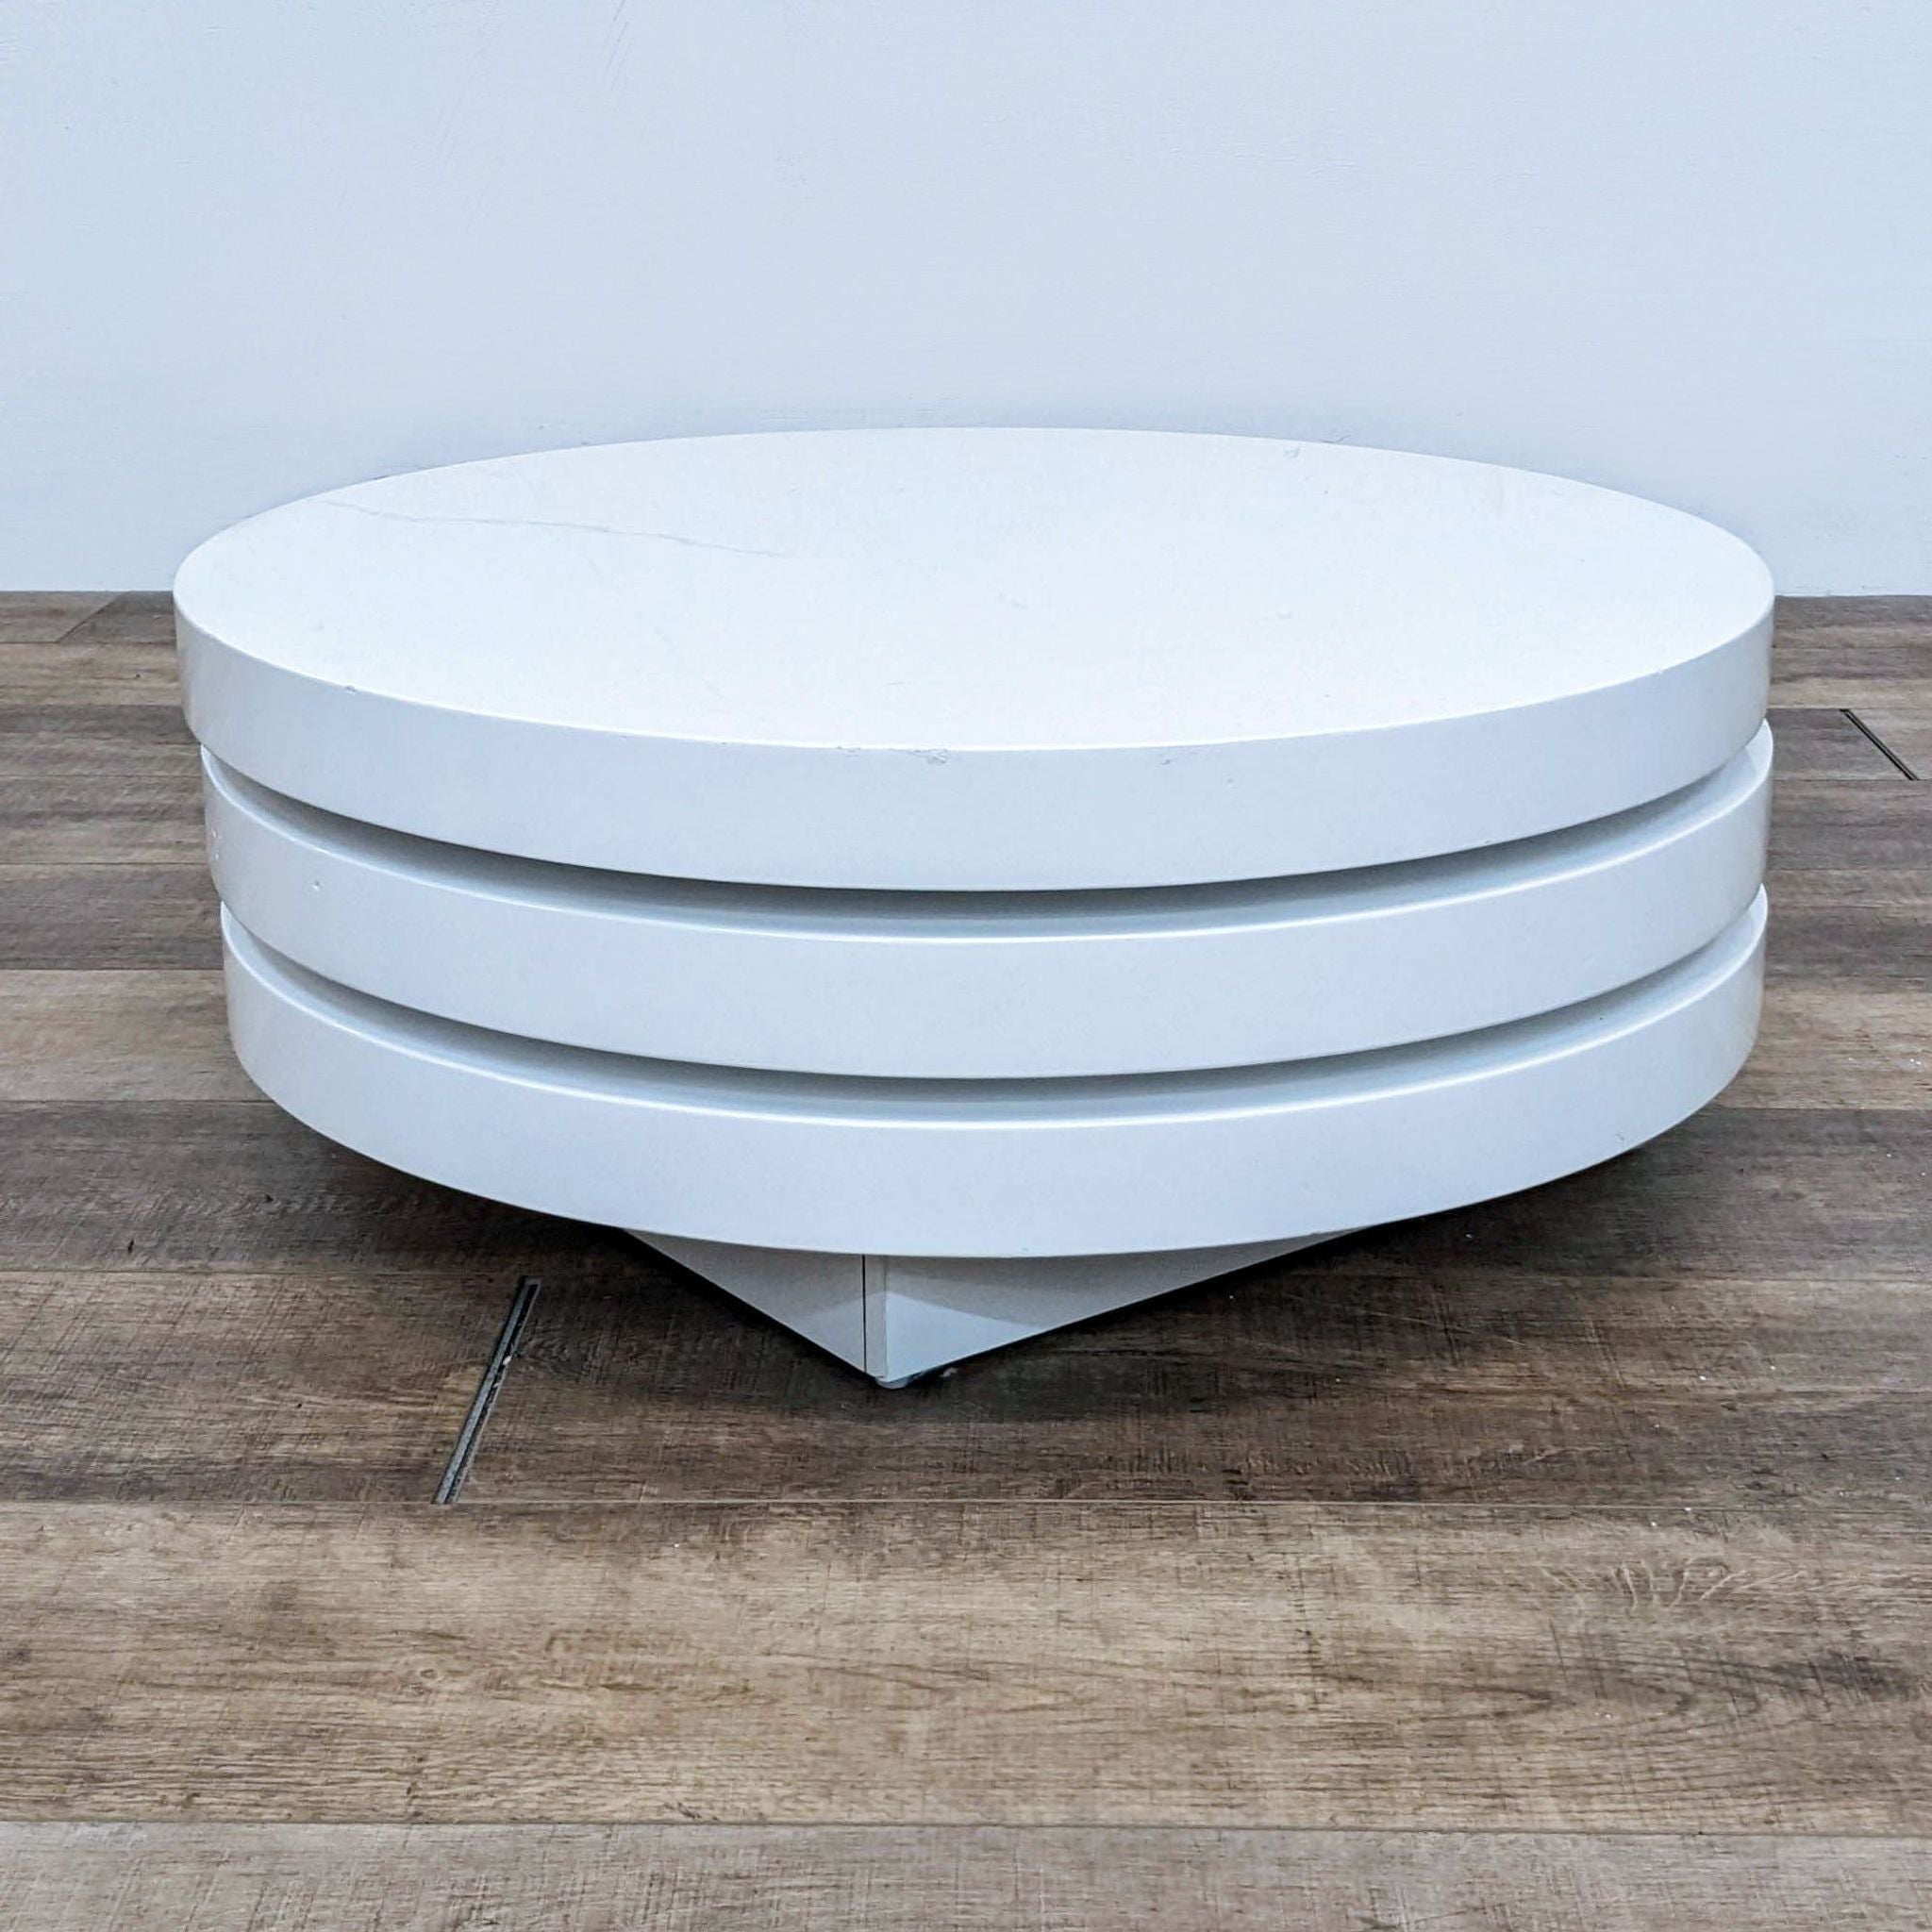 Round white high-gloss MDF coffee table by Moe's Home Collection with layered design on a wooden floor.